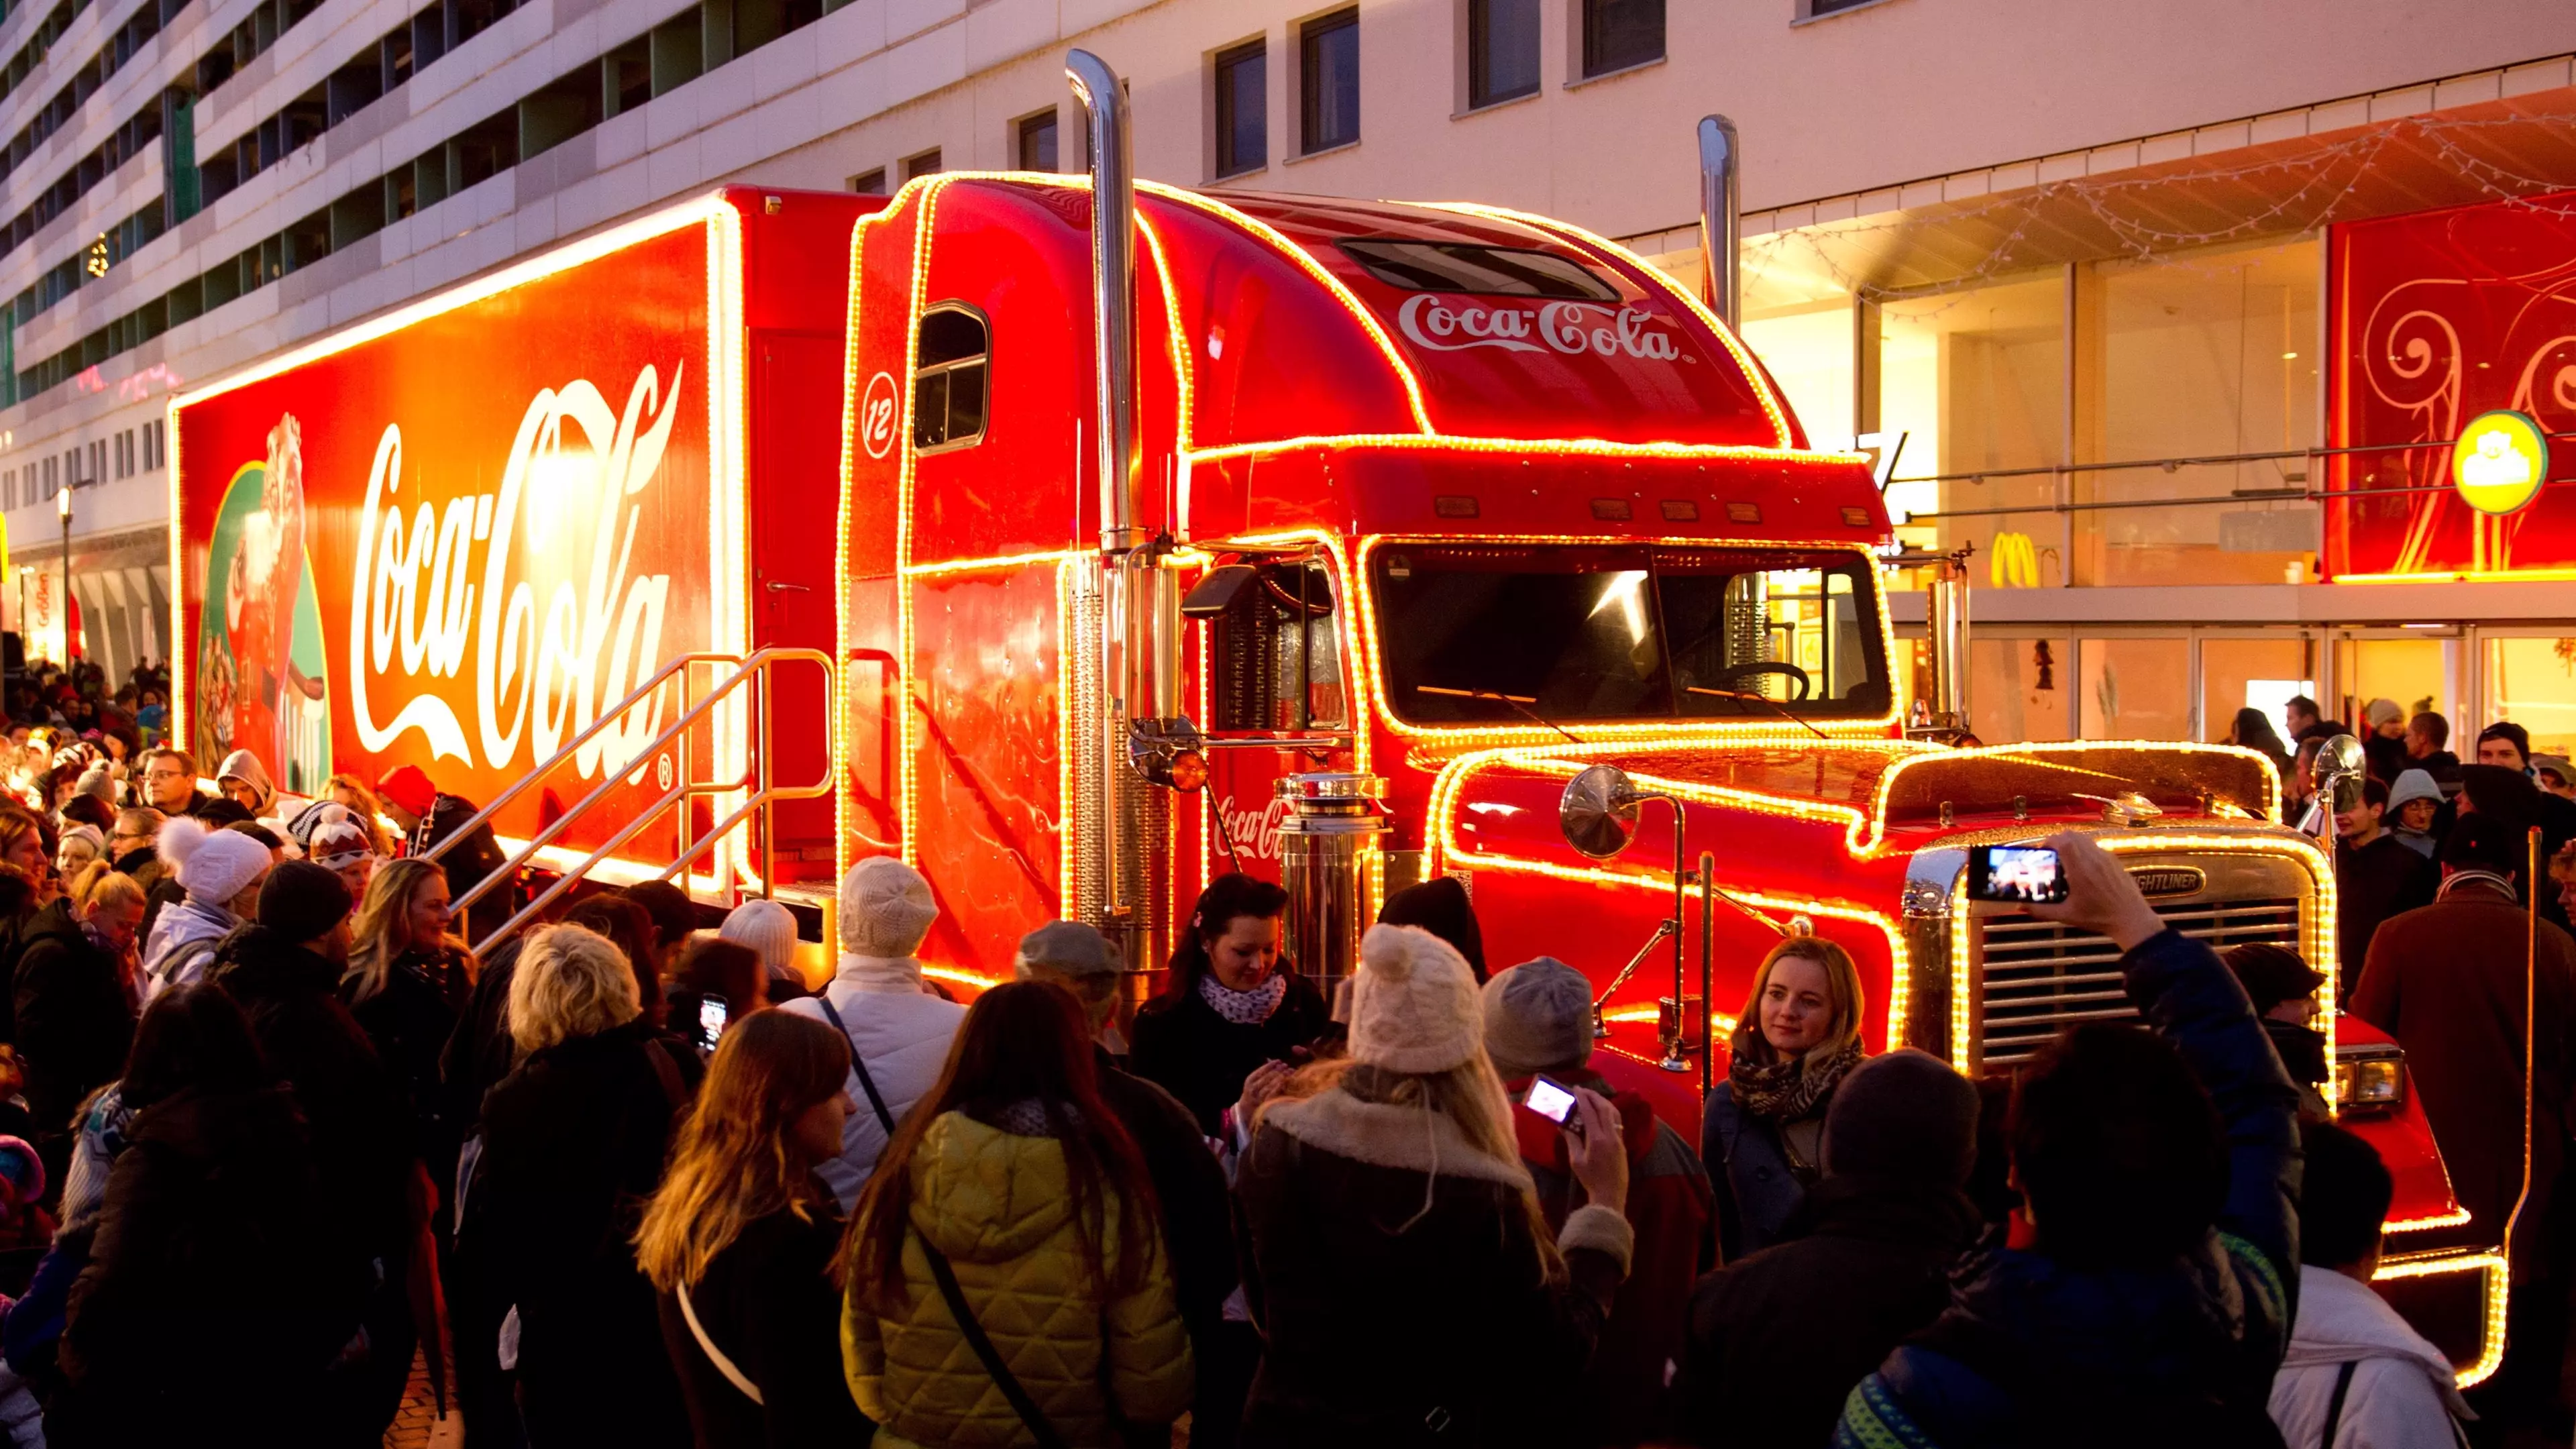 Coca-Cola Bus Spotted In London As The Countdown To Christmas Starts Early